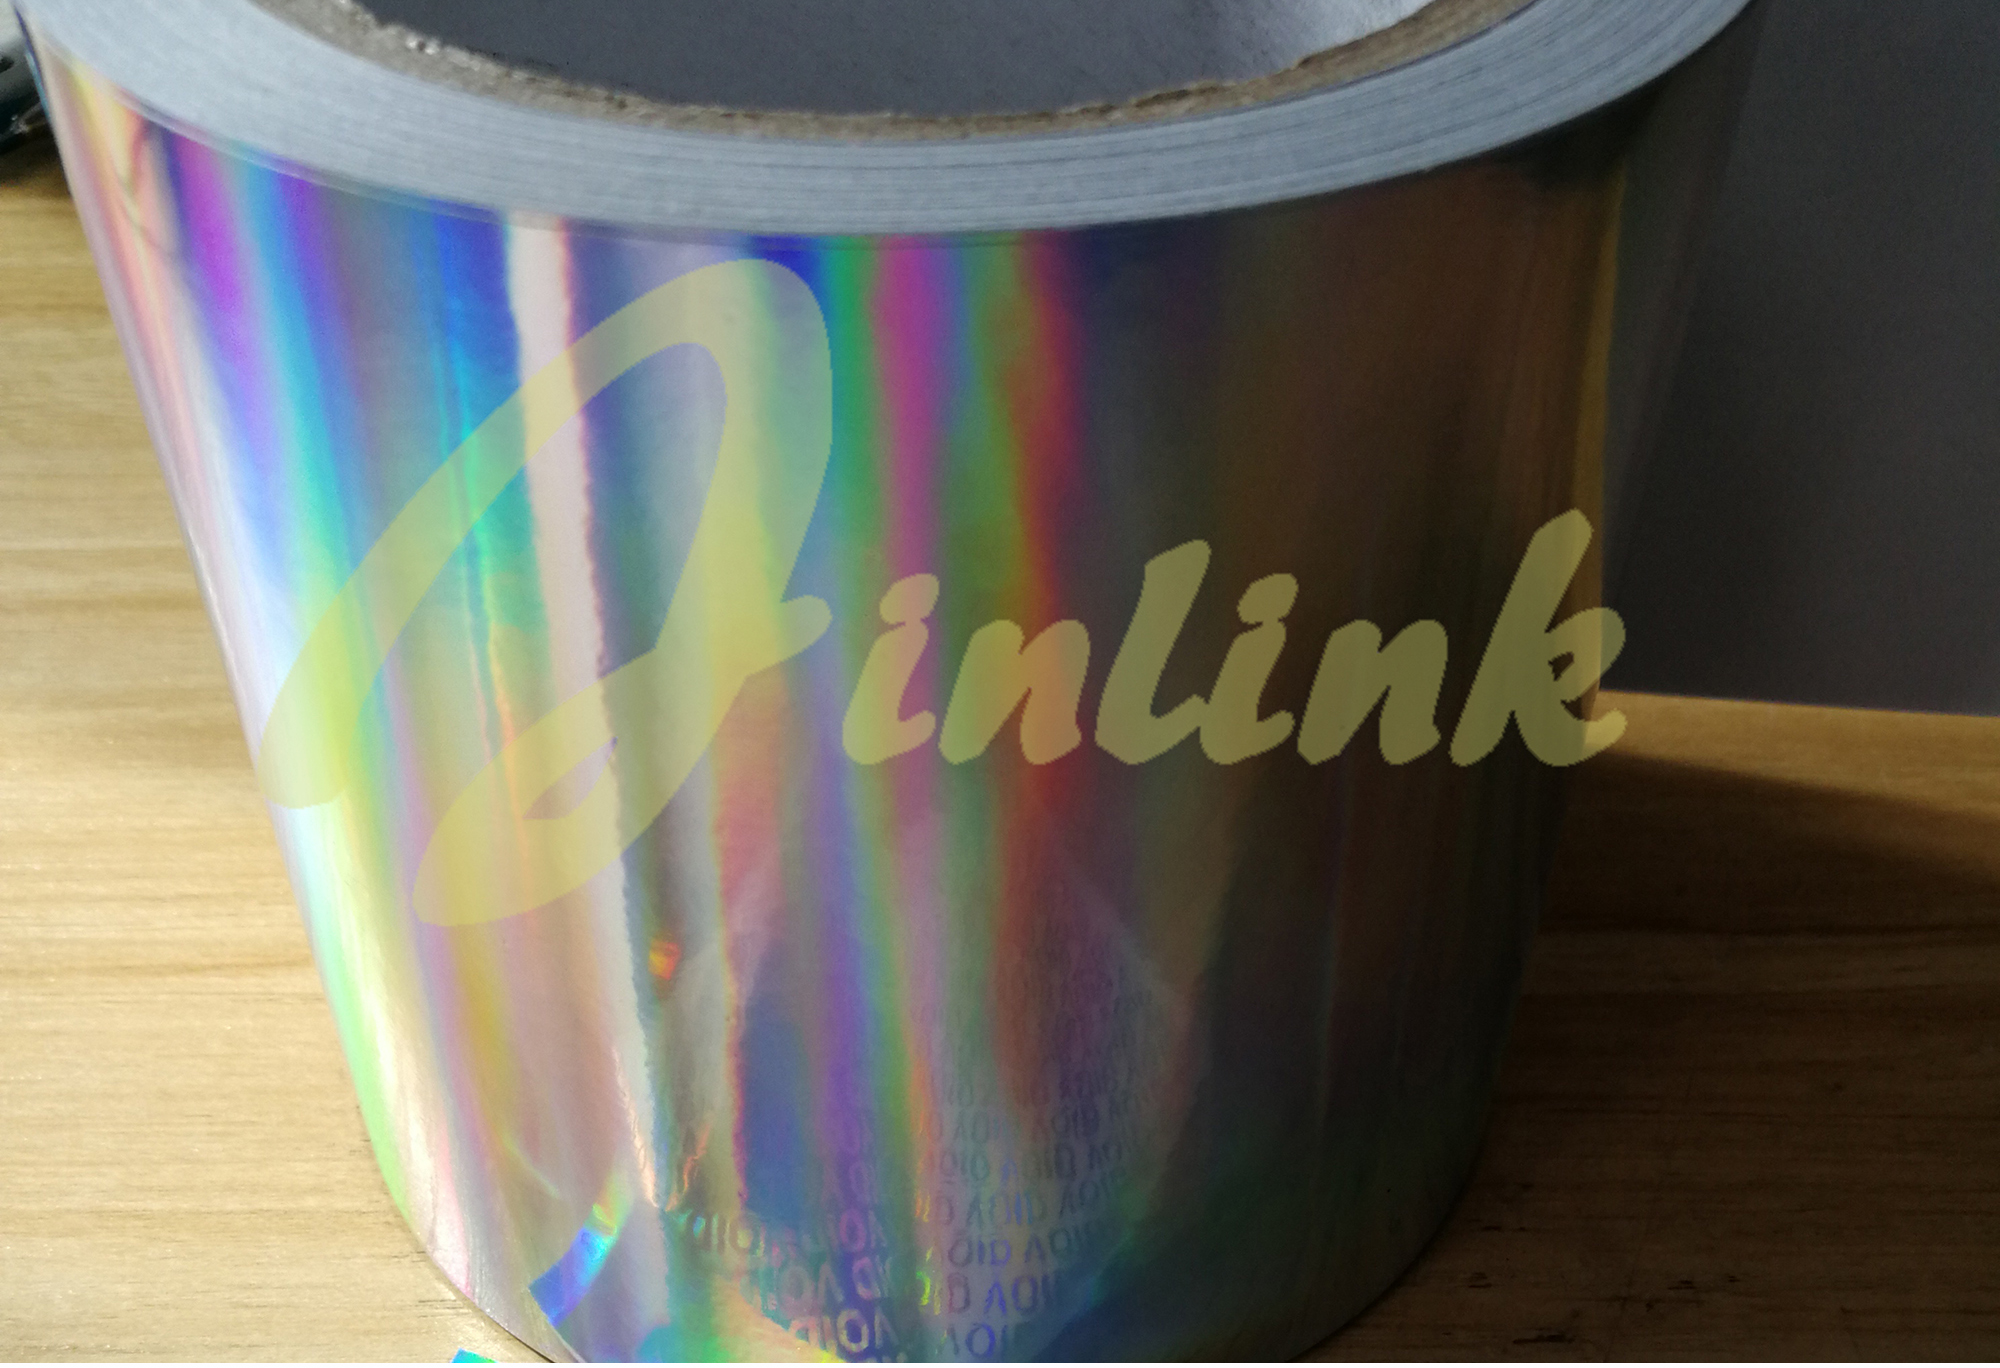 Partial transfer tamper evident holographic label material